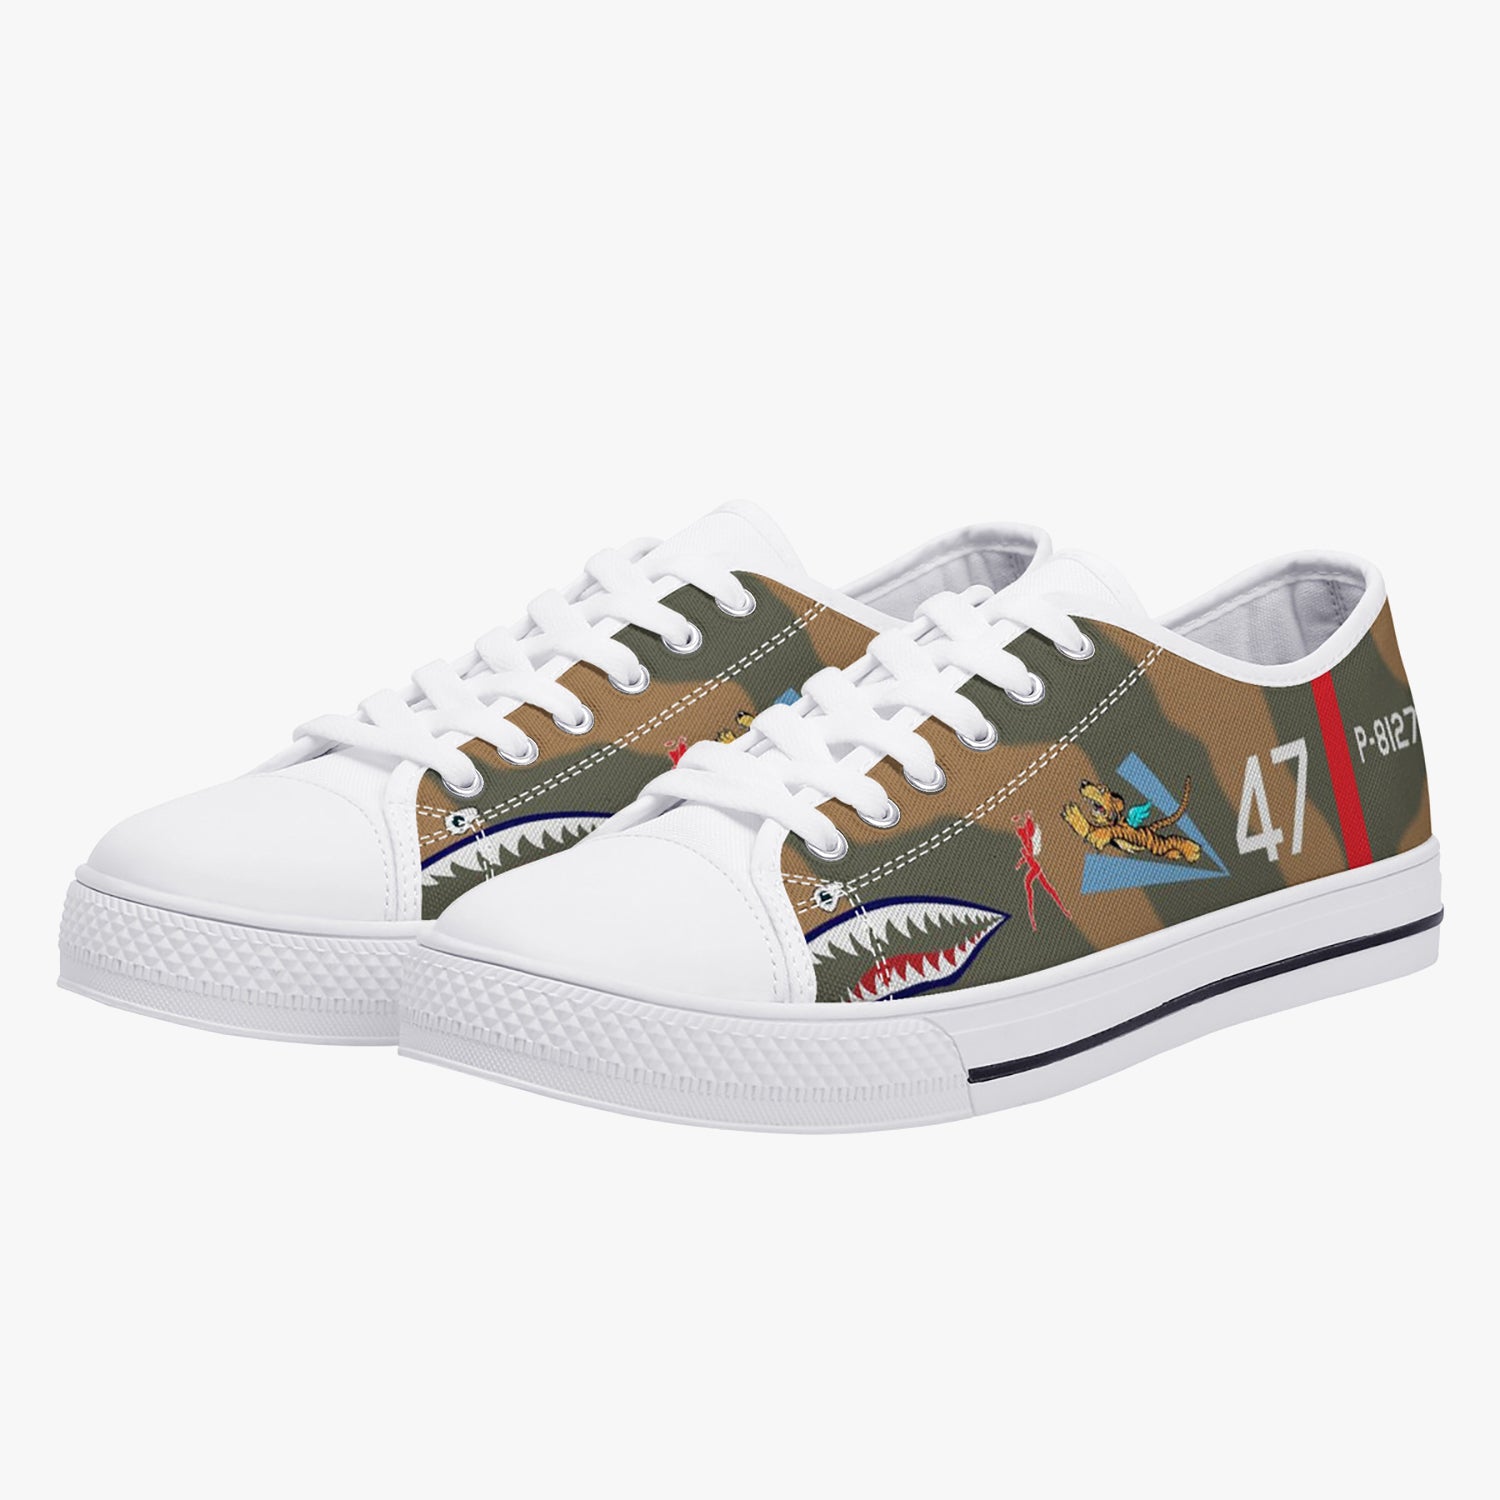 P-40 "White #47" of Robert Smith Low Top Canvas Shoes - I Love a Hangar